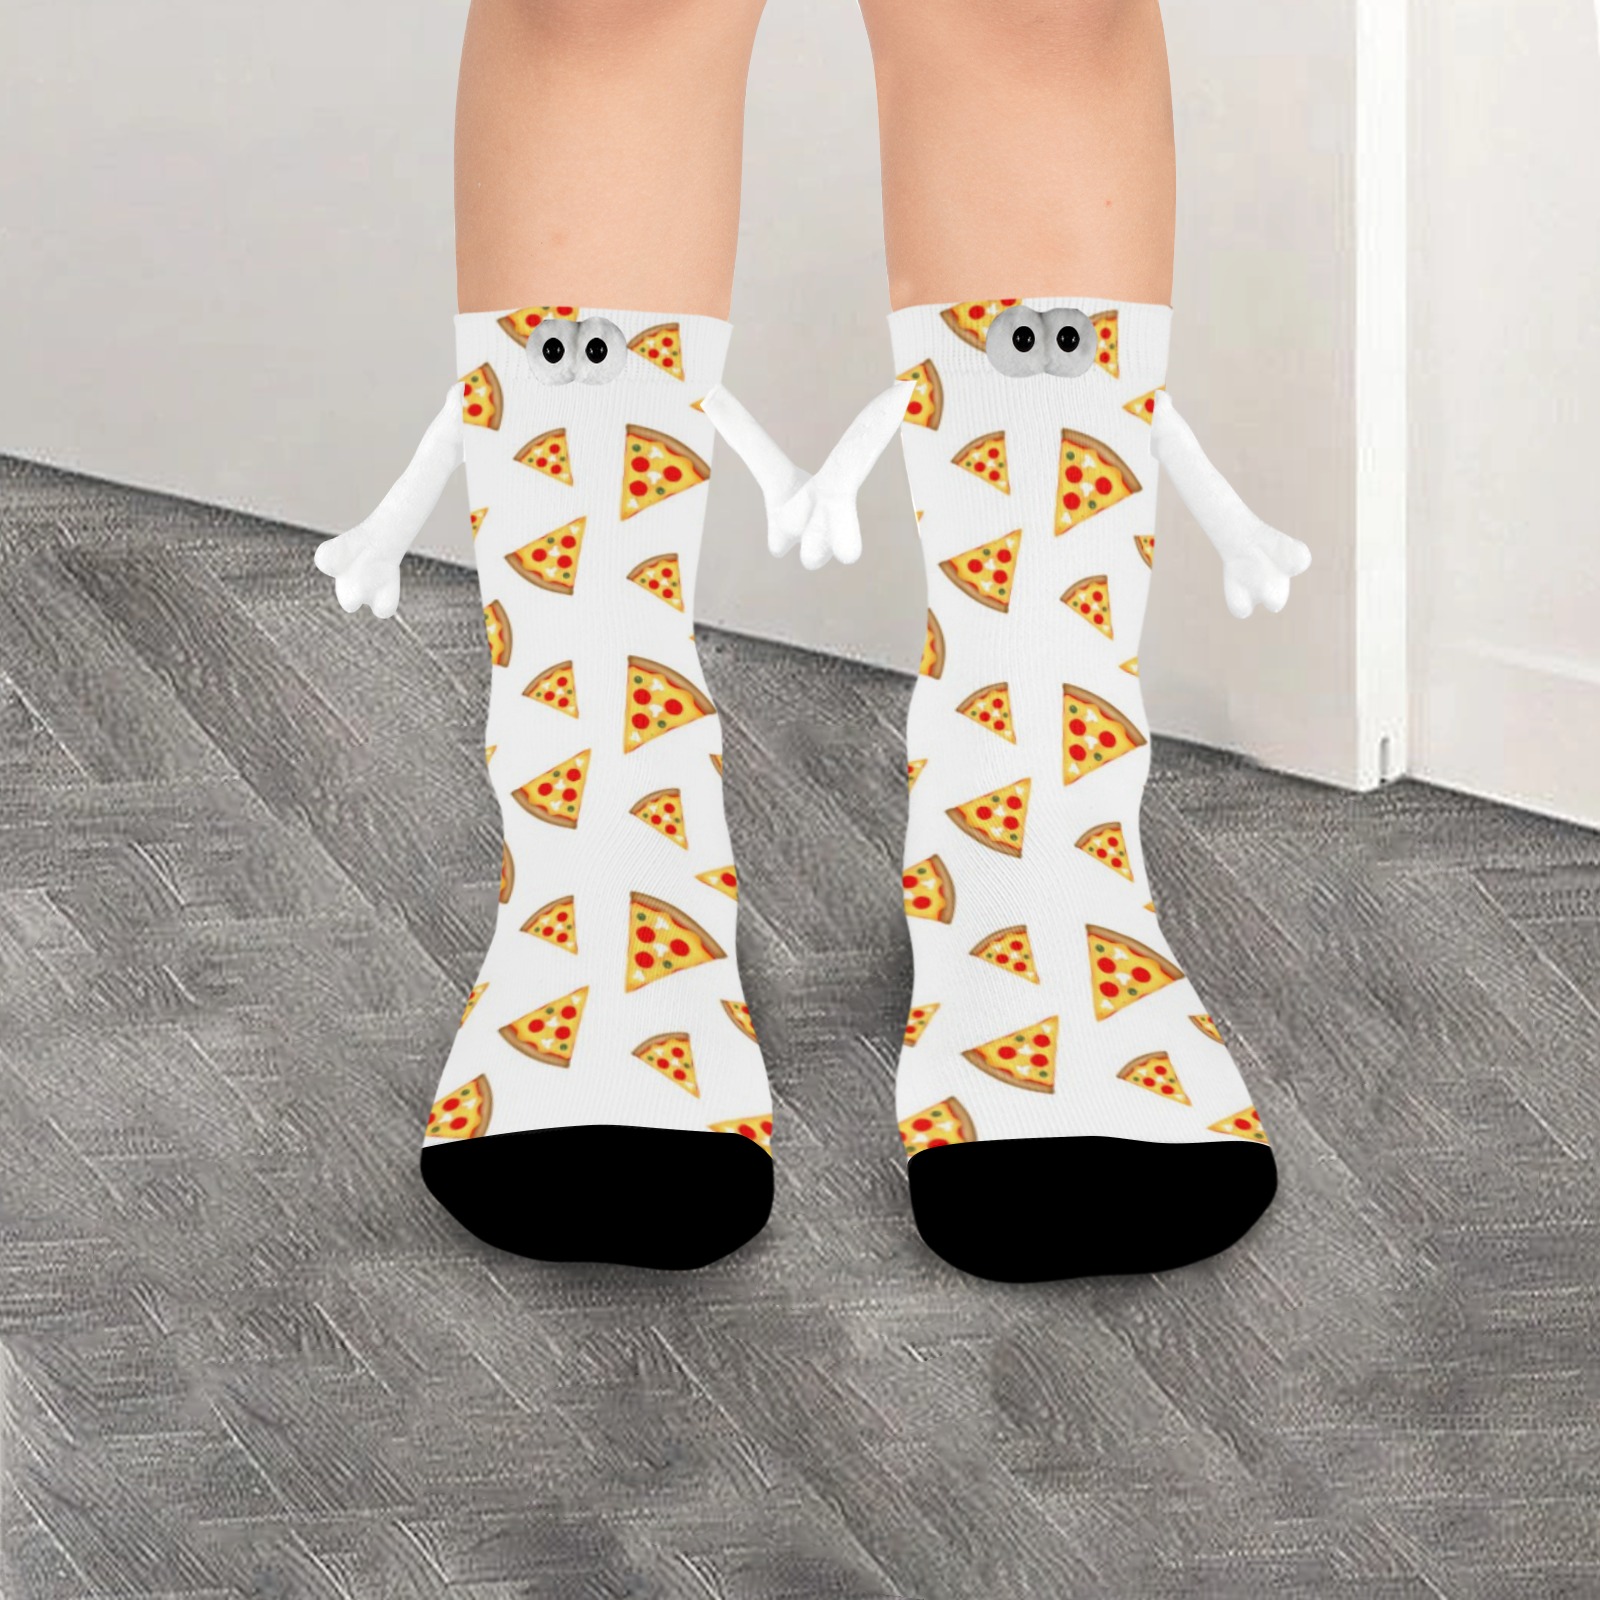 Cool and fun pizza slices pattern on white Holding Hands Socks for Kids